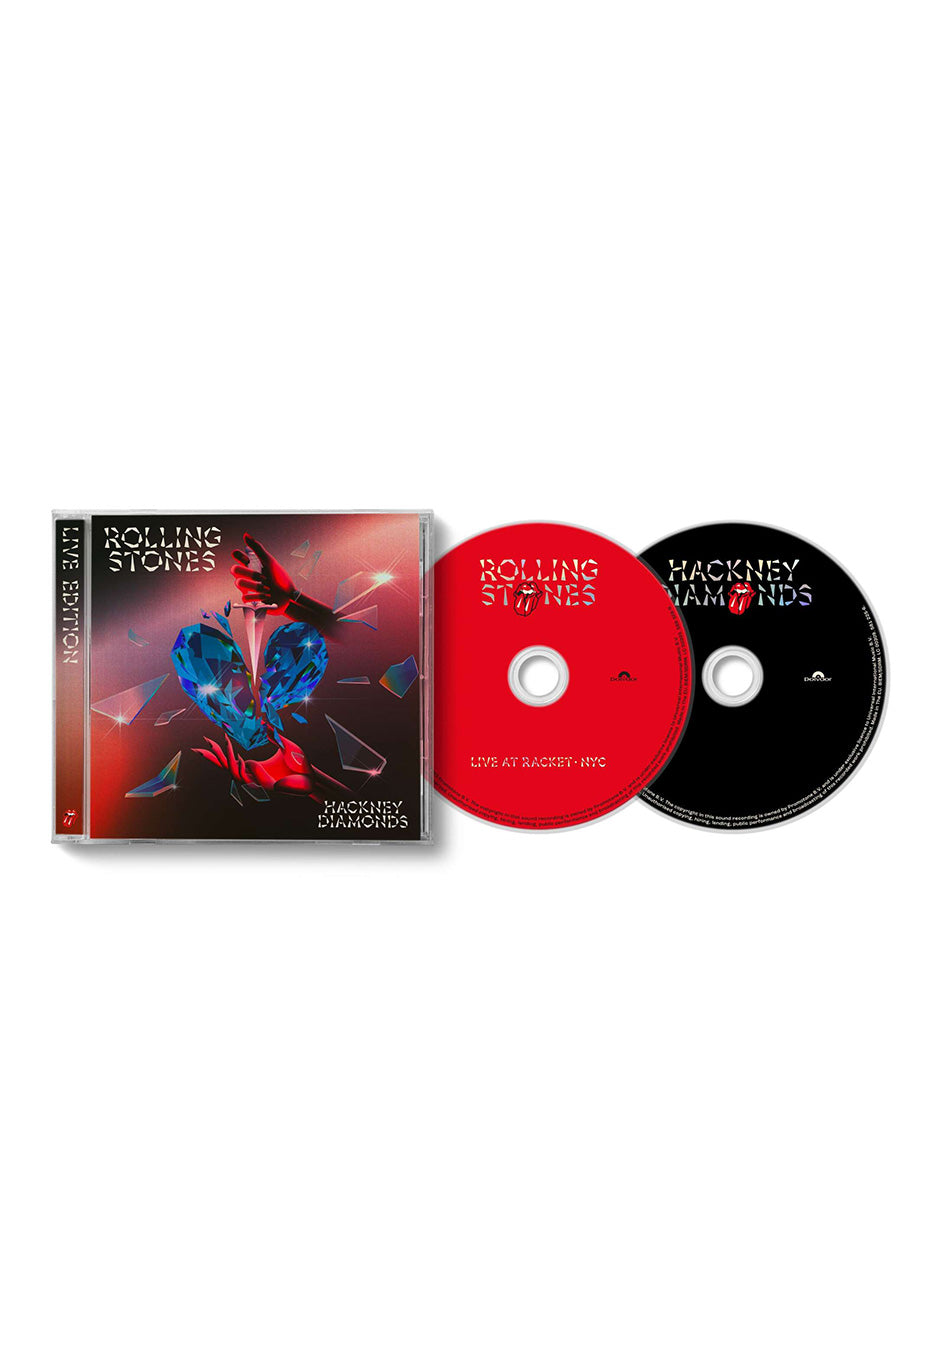 The Rolling Stones - Hackney Diamonds (Live Edition) - 2 CD | Neutral-Image